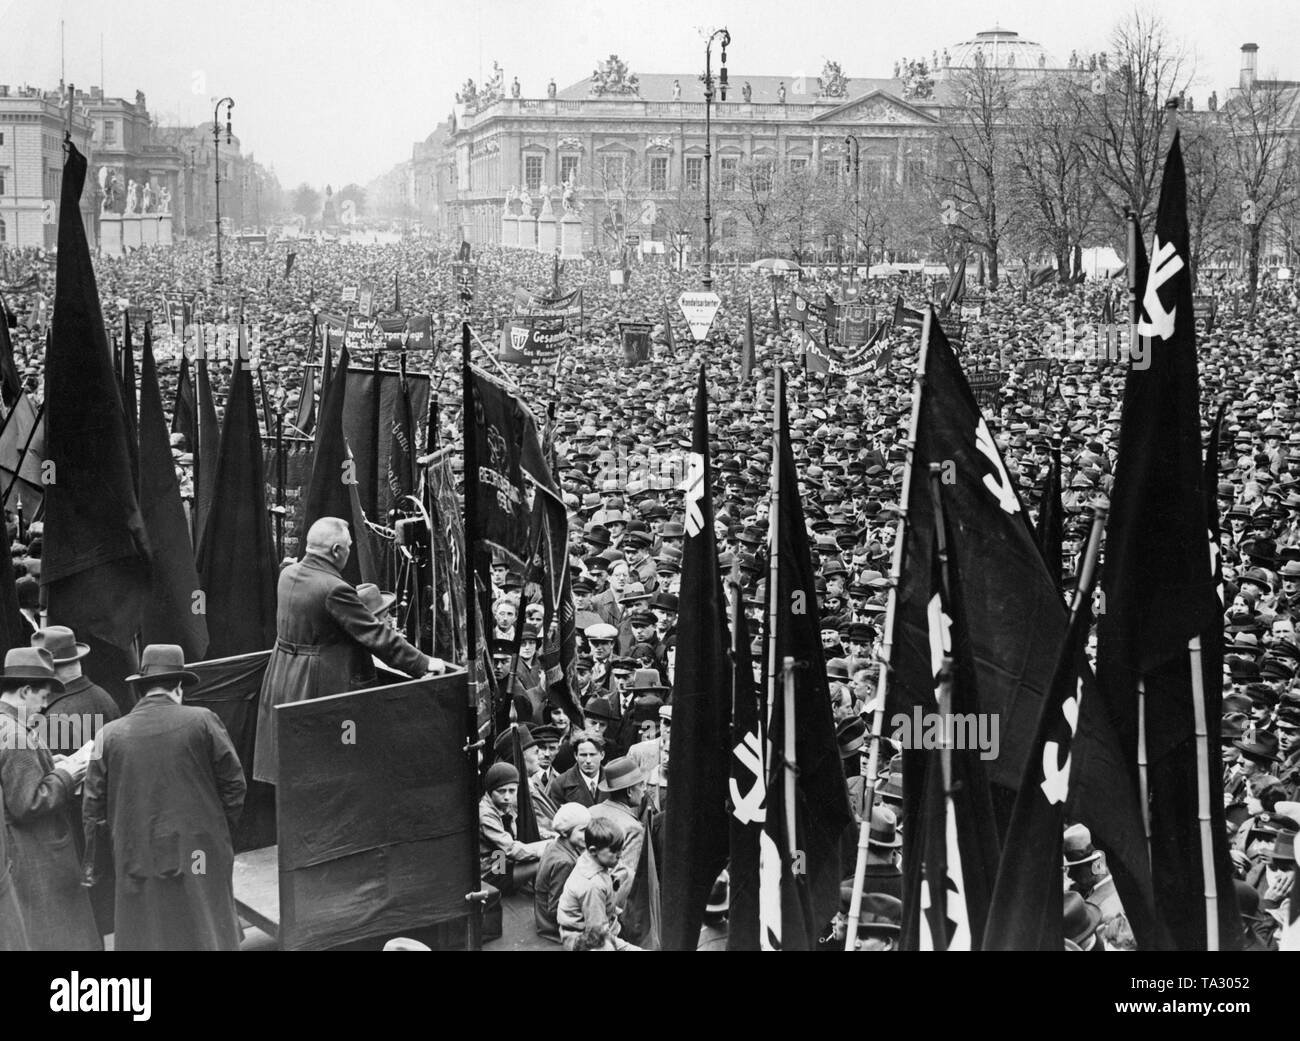 Trade union rally on 1 May, 1930. Numerous control services are present with their Socialist party flags. SPD party leader Otto Wels is holding a speech. Stock Photo